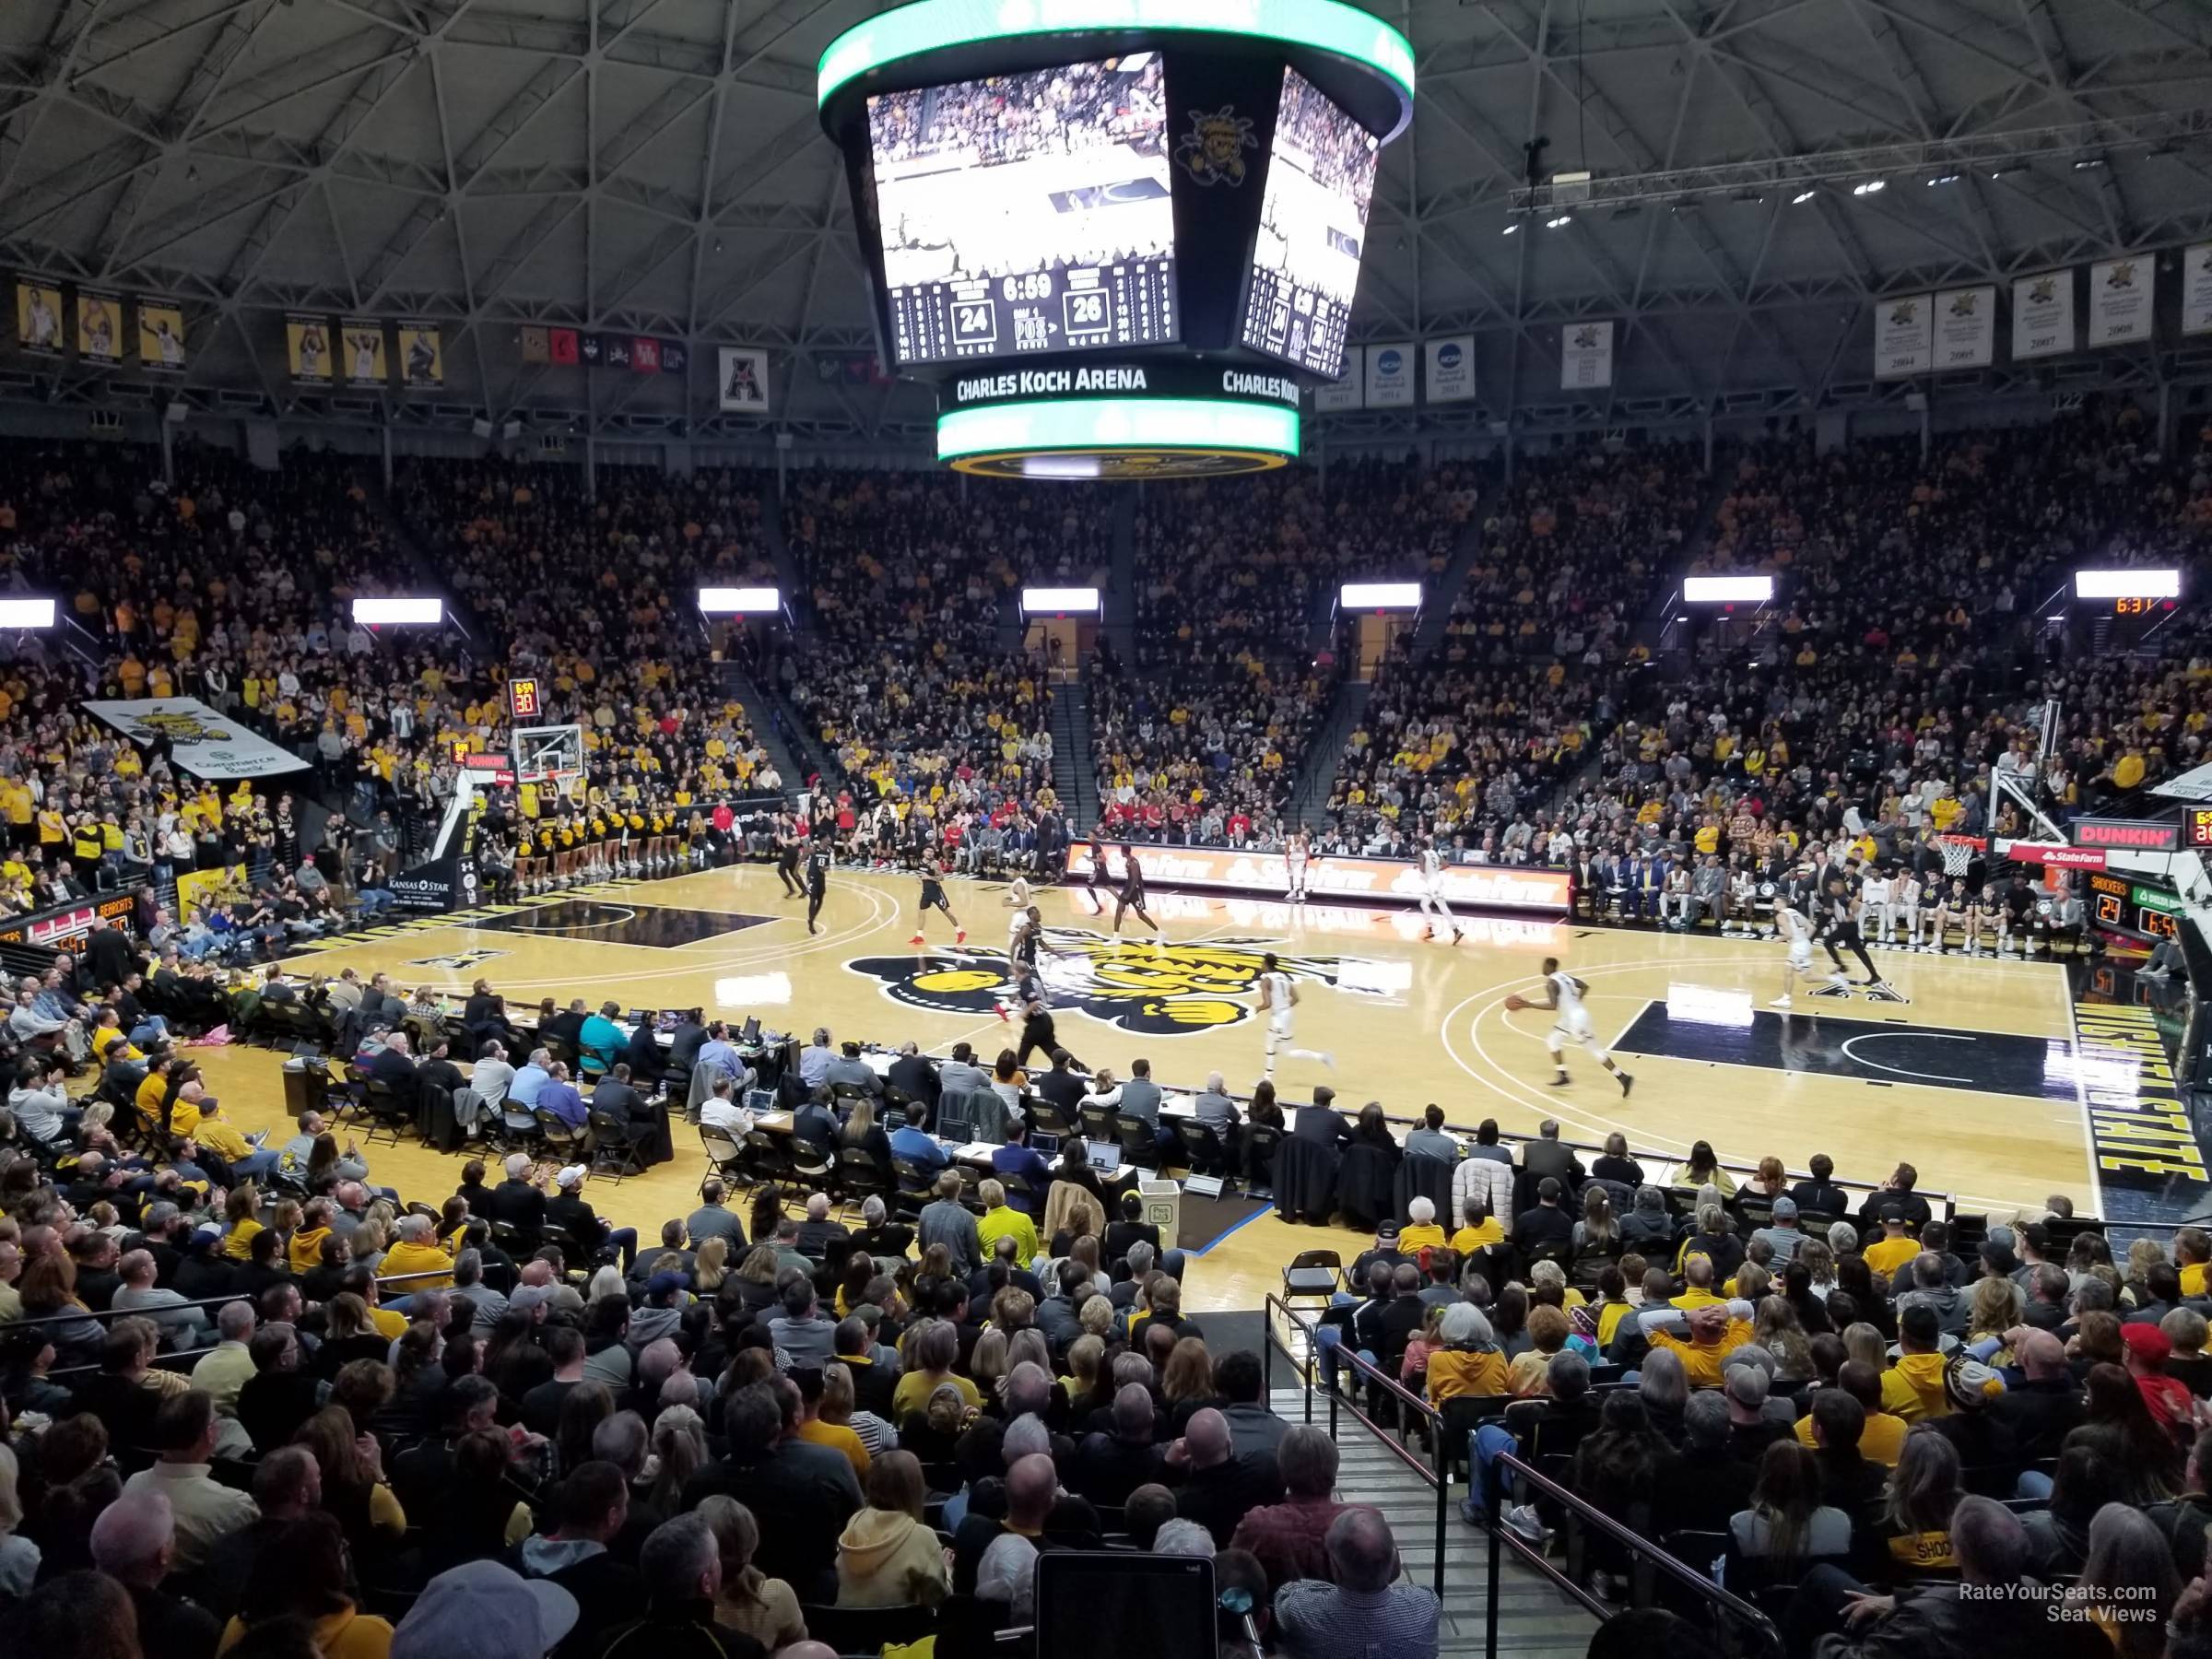 section 105, row 21 seat view  - charles koch arena